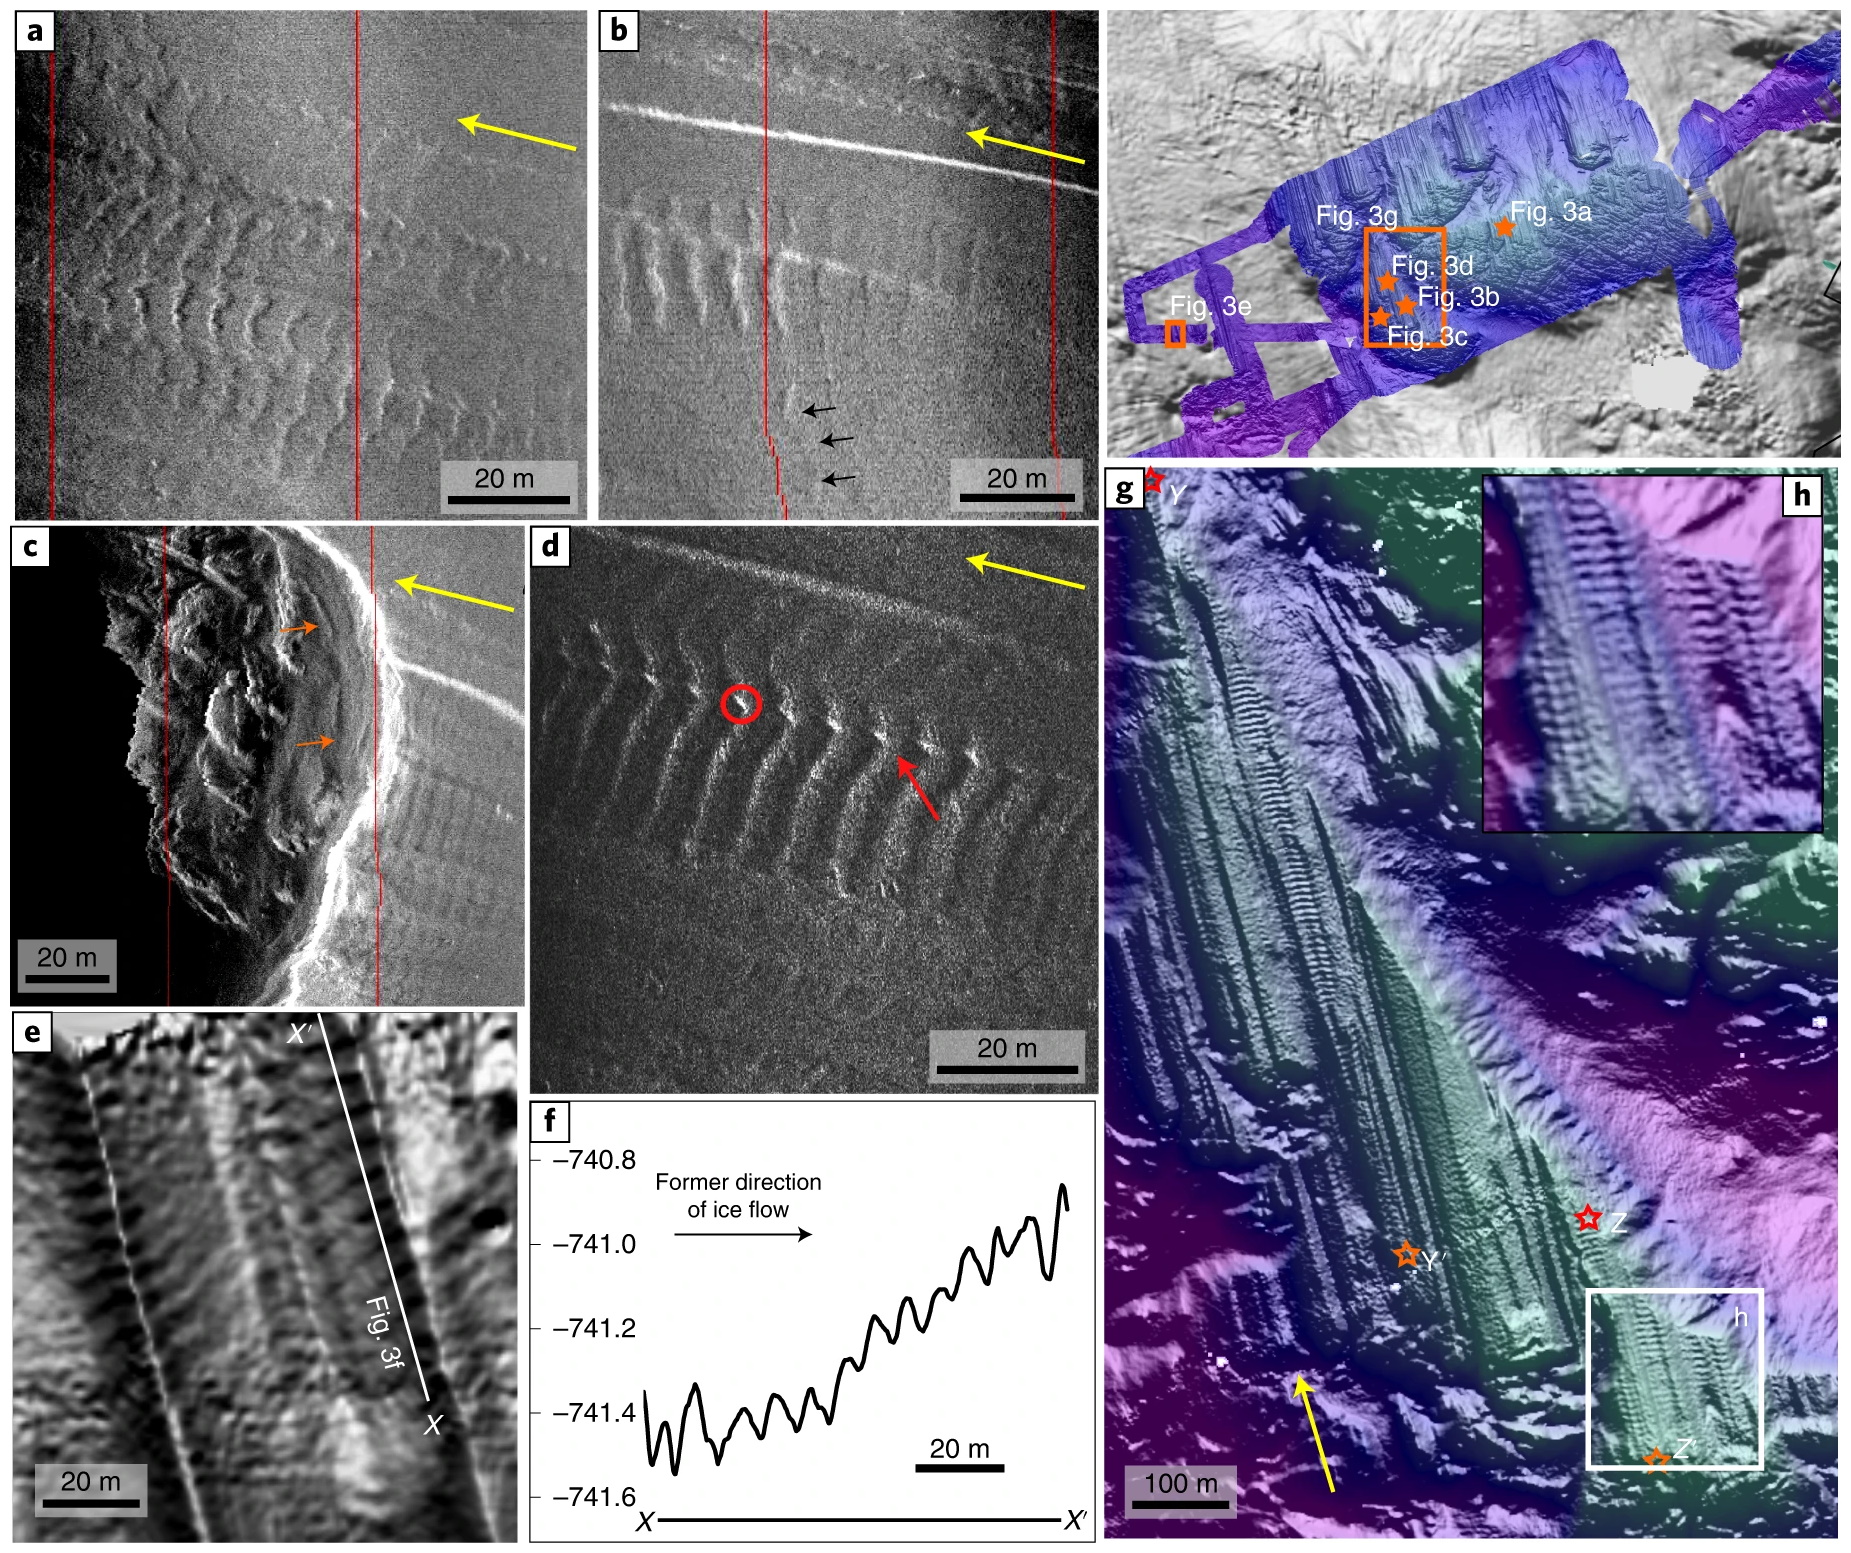 Details of Thwaites Glacier sea-floor ribs on high-resolution AUV sidescan and multibeam data. a–d, Examples of high-frequency sidescan imagery illustrating the back-stepping conformity of ridge shape (a), non-alignment of ribs to underlying lineations (b), rib formation on terraces (c) and the ‘beading’ (red circle) and overprinting (red arrow) of existing subglacial features (d). e, Multibeam hillshade showing fine-scale landforms, <20 cm high, crossing lineation ridges and grooves. f, Corresponding profile X–X′, demonstrating the subtle geometries of some of the landforms (5–20 cm) and their surprising depth (>740 m). g,h, Multibeam swath bathymetry covering the longest series of ribs (profile Y–Y′ and Z–Z′ combined; stars mark start and end of profile sections). Inset shows close-up example of lateral continuity in the southern portion of the ribs. Black arrows in ‘b’ mark lateral continuation of one oblique ridge. Yellow arrows in each image show ice flow direction inferred from lineations. Graphic: Graham, et al., 2022 / Nature Geoscience